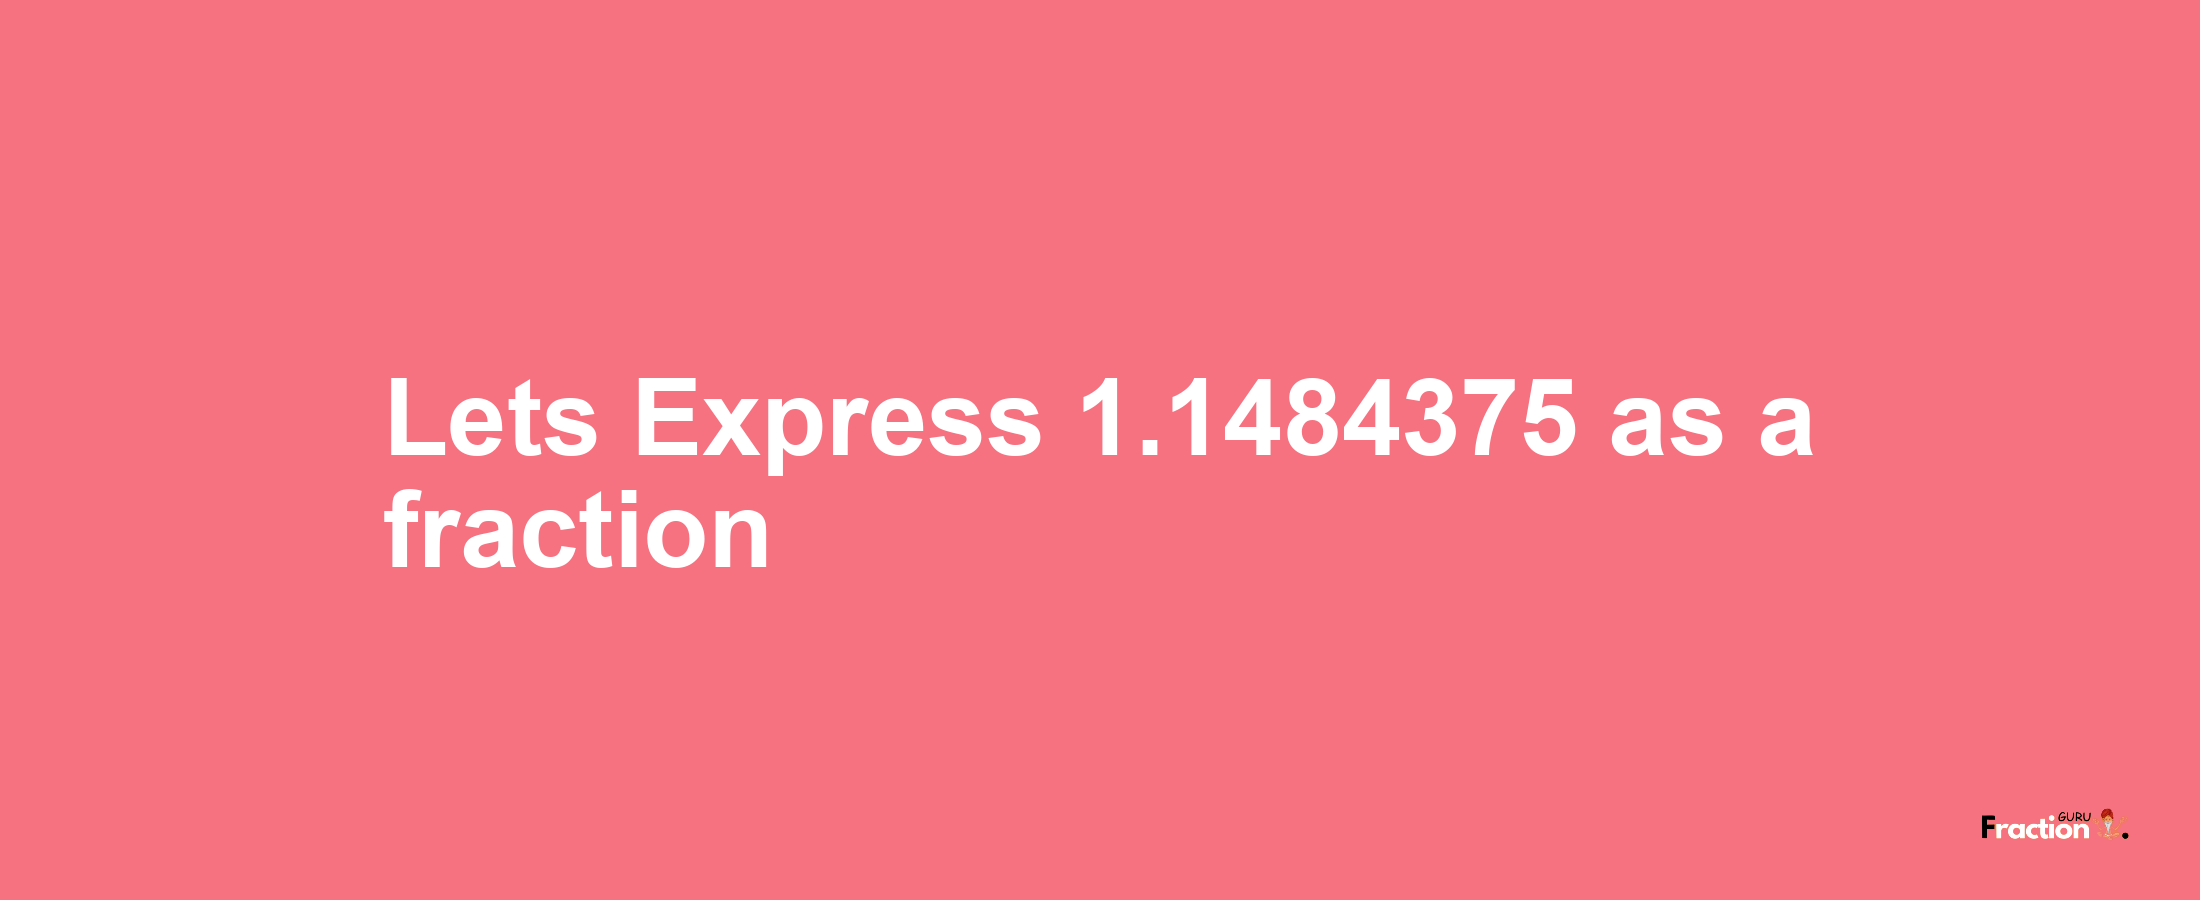 Lets Express 1.1484375 as afraction